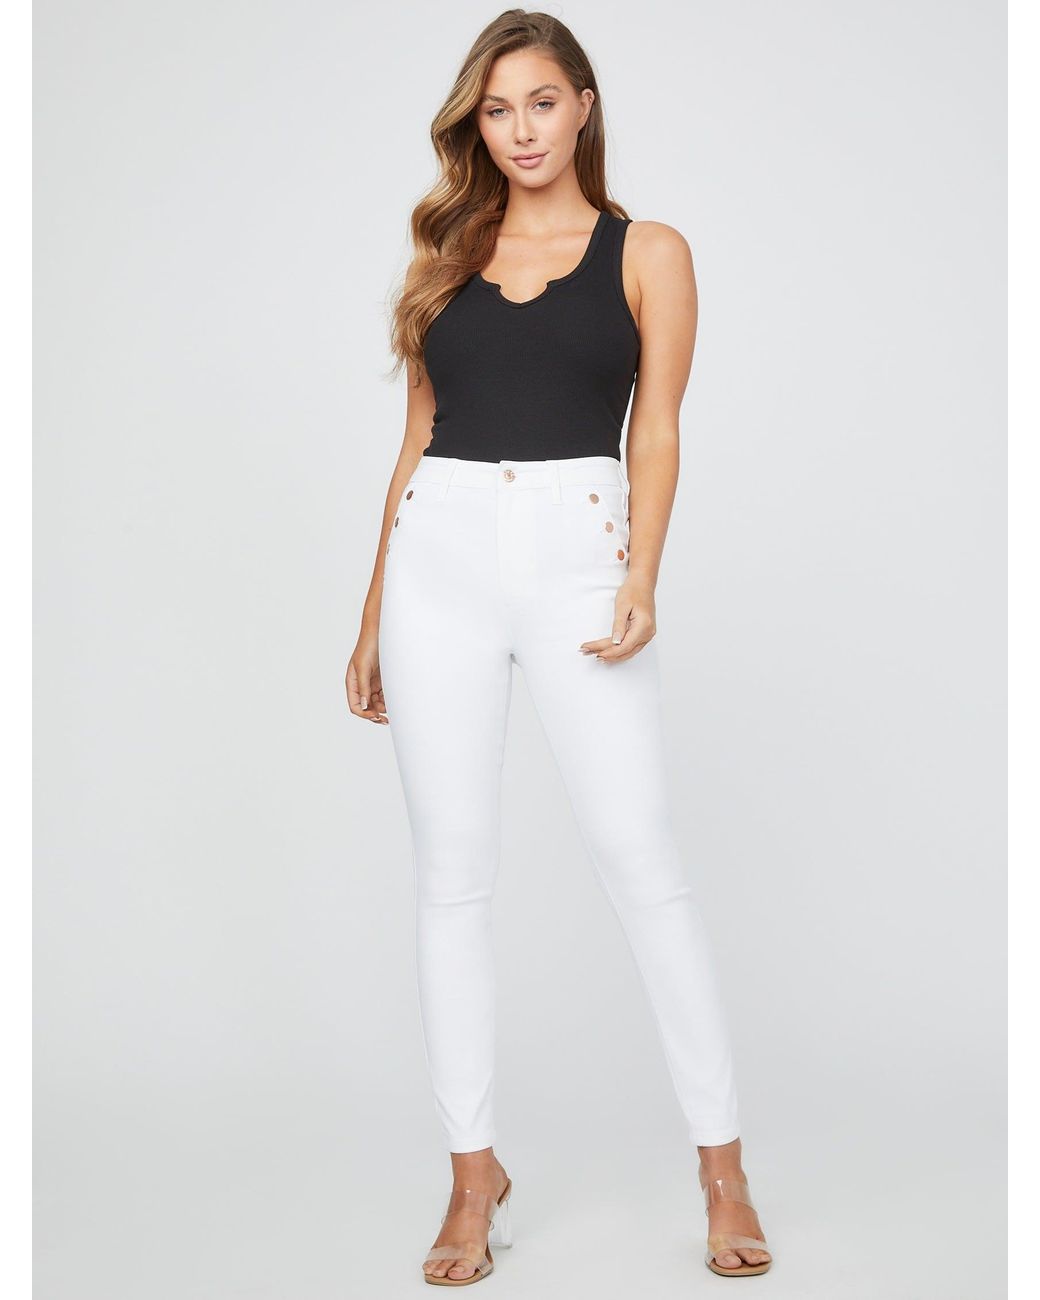 Guess Factory Vivianna Super High-rise Sailor Jeans in White | Lyst